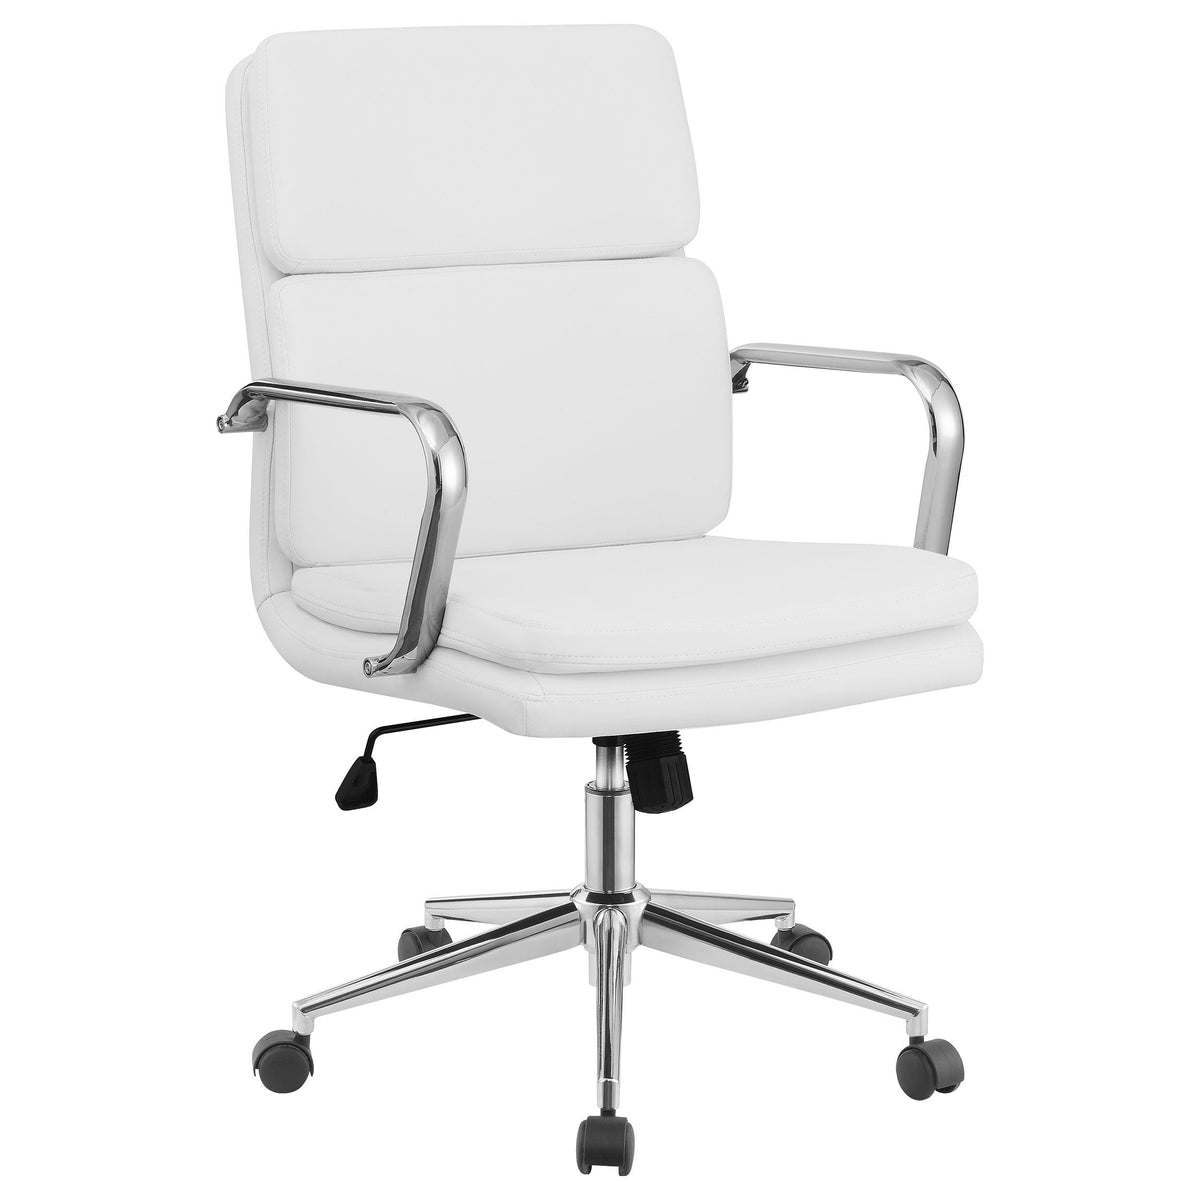 Ximena Standard Back Upholstered Office Chair White  Las Vegas Furniture Stores